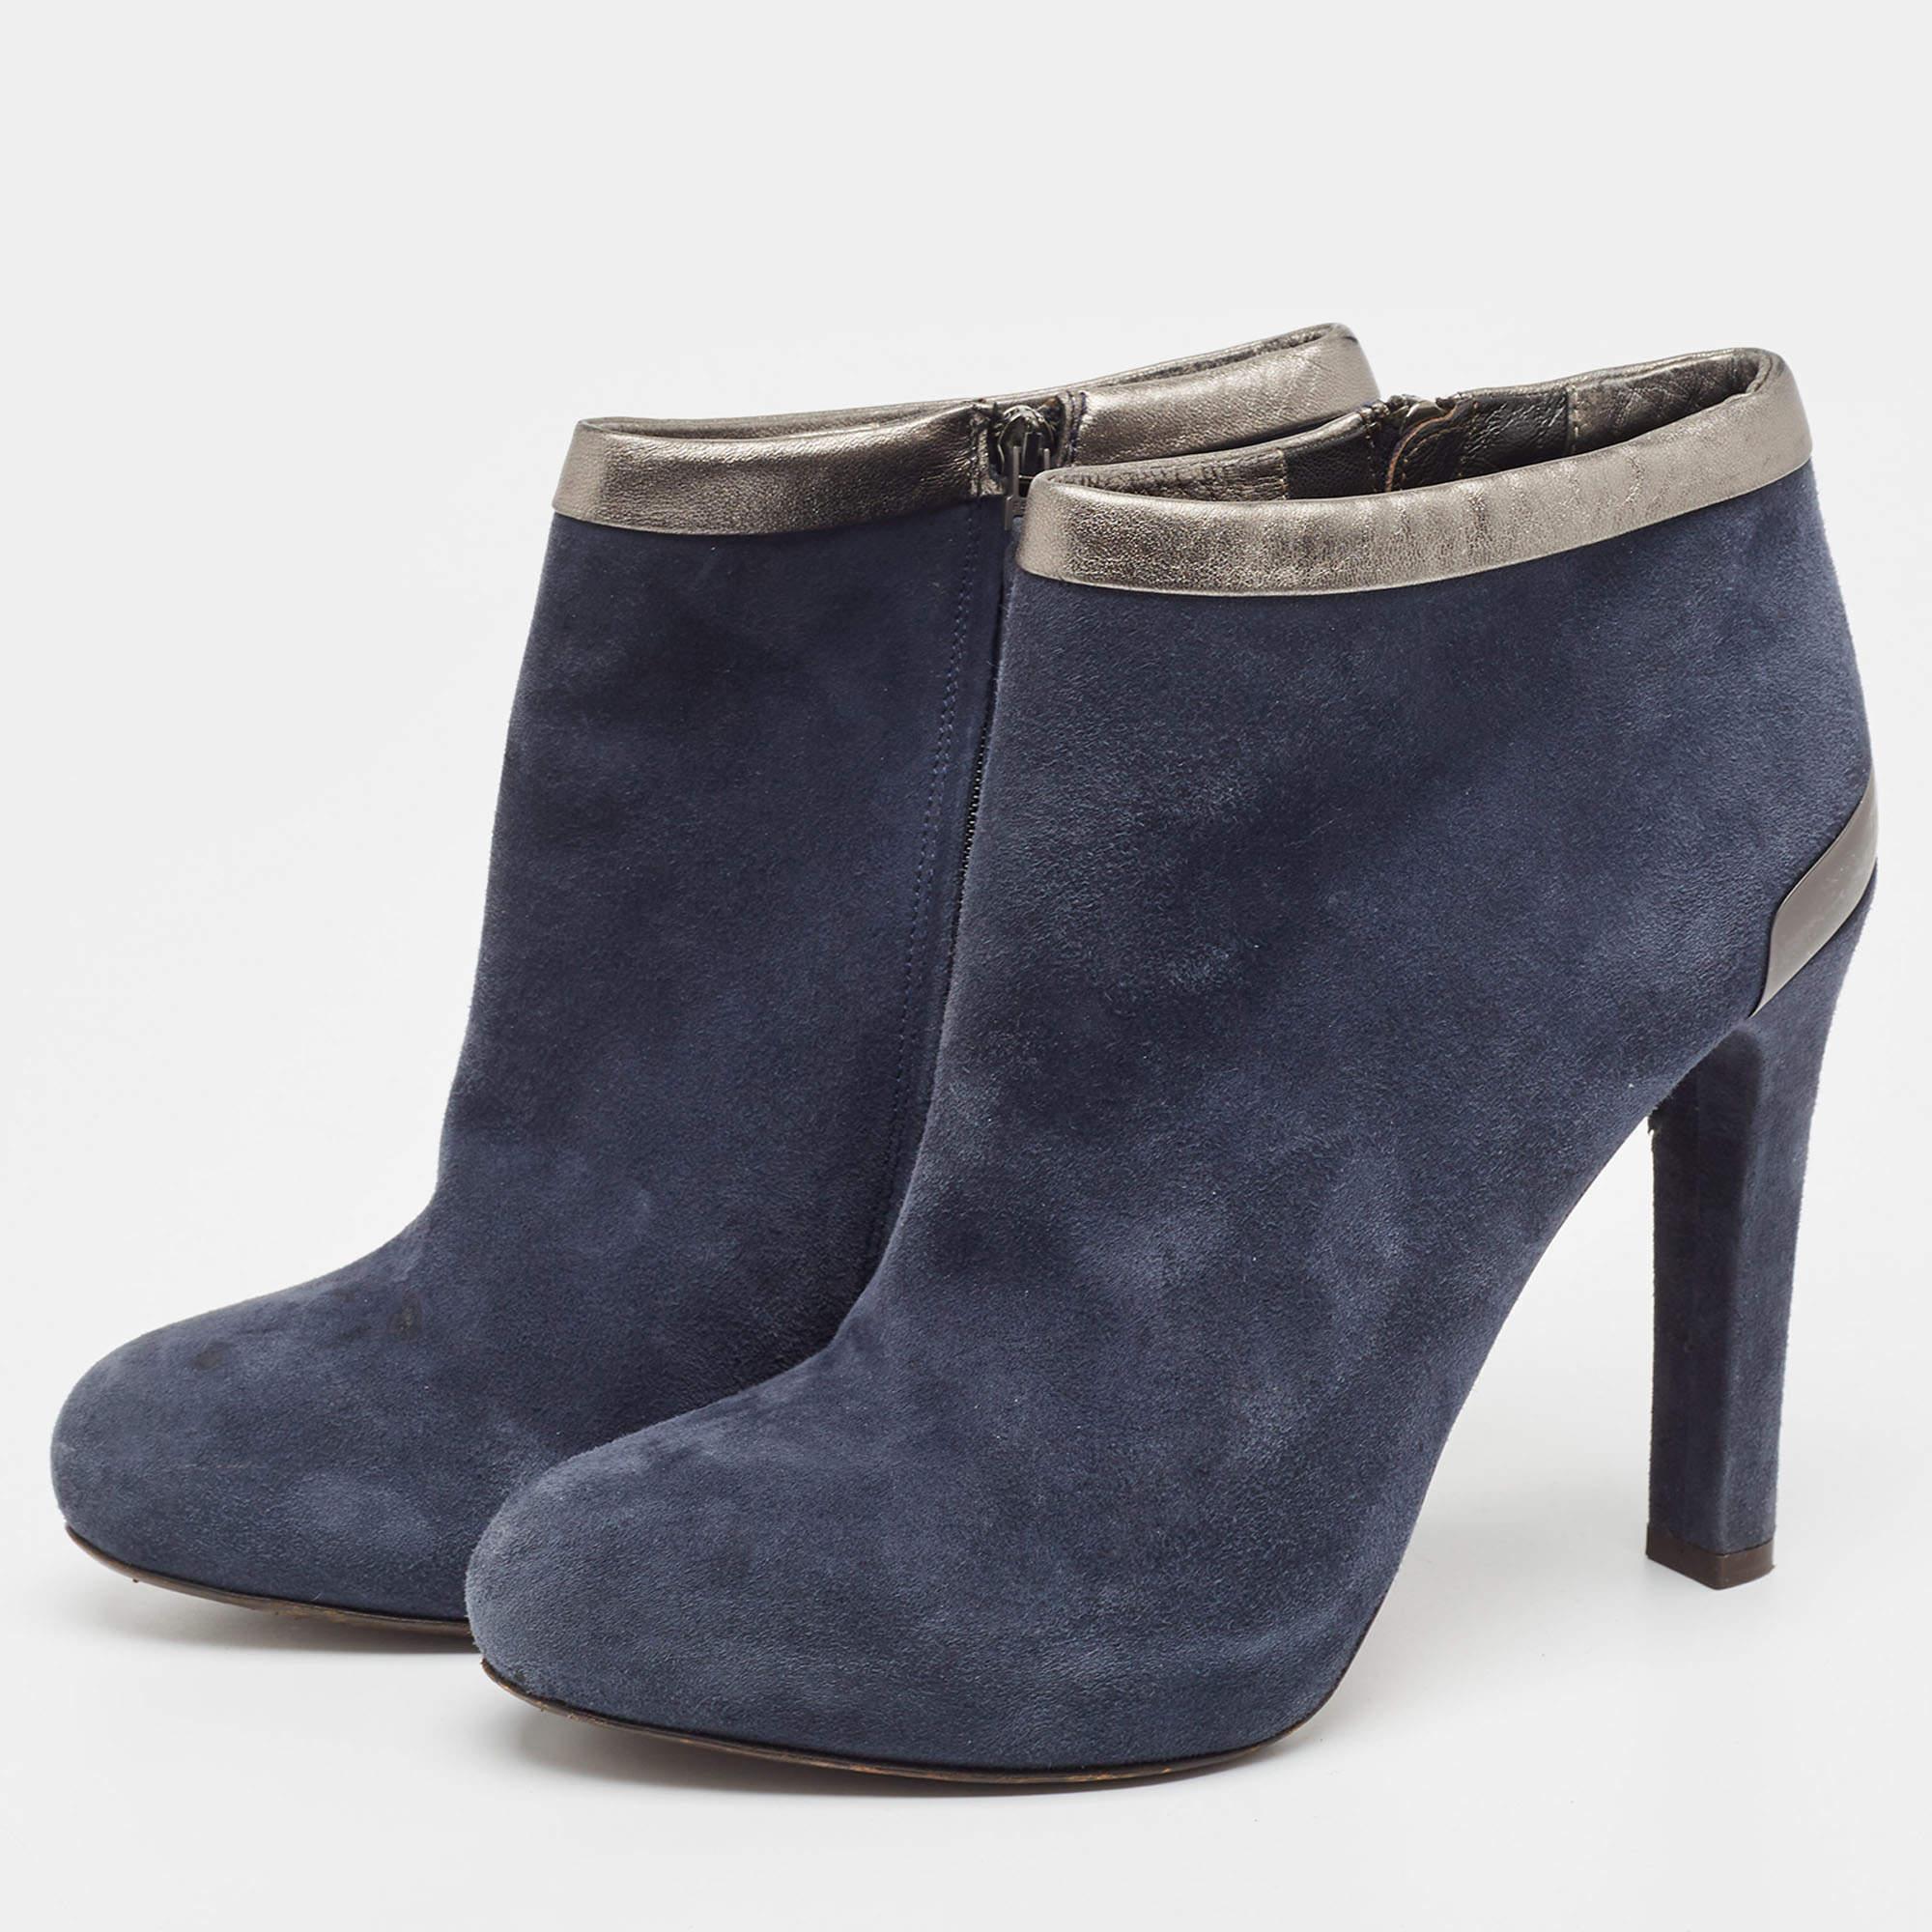 Fendi Navy Blue Suede Ankle Booties Size 39.5 4